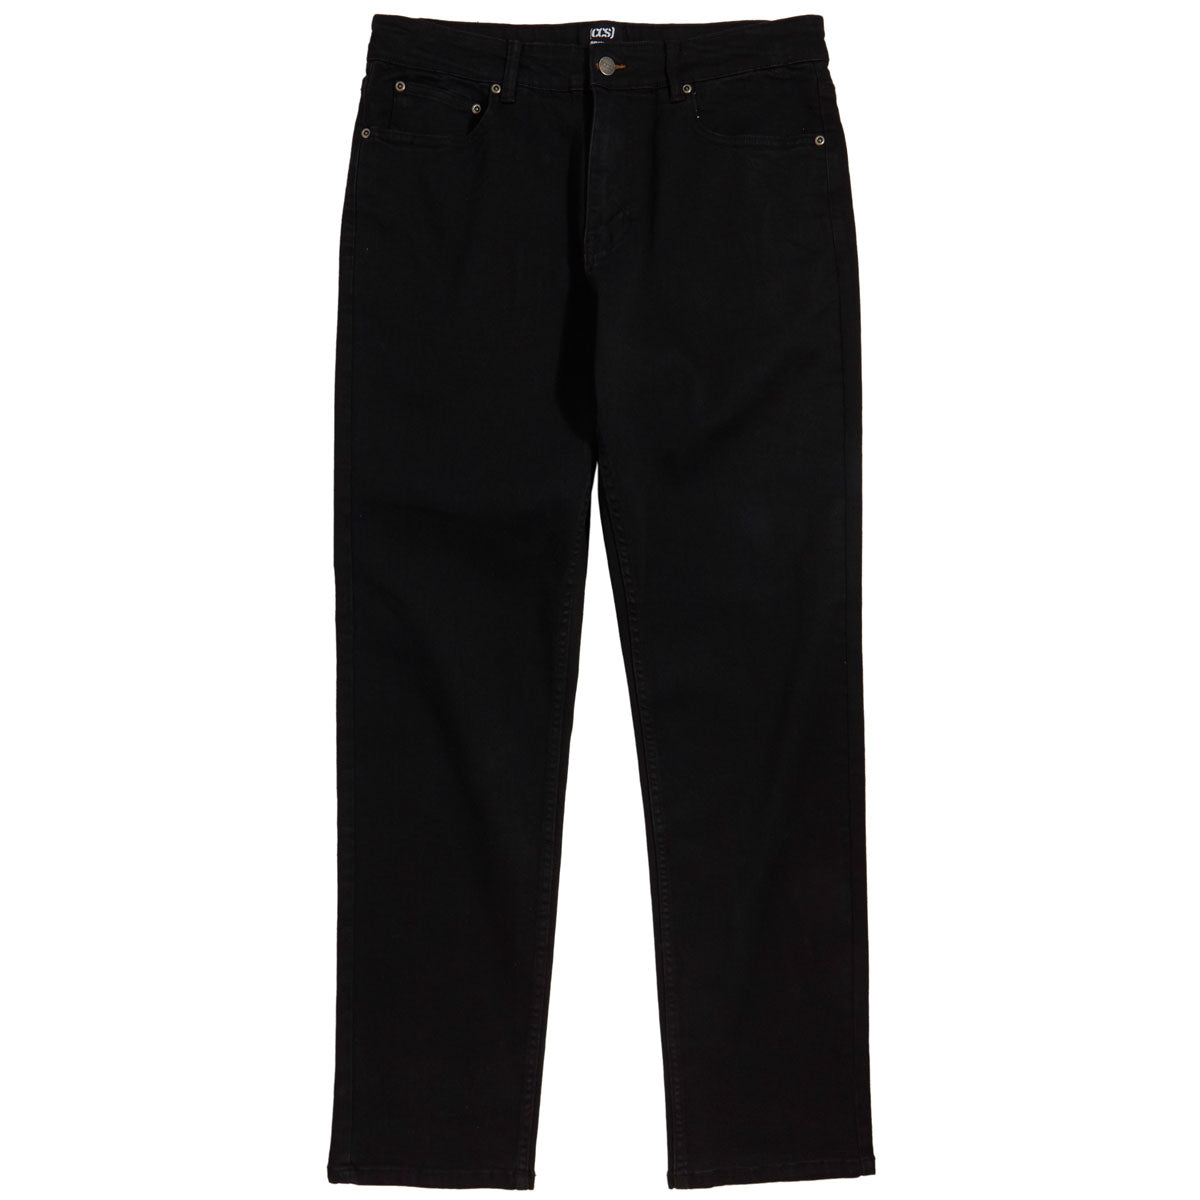 CCS Standard Plus Relaxed Denim Jeans - Overdyed Black image 5